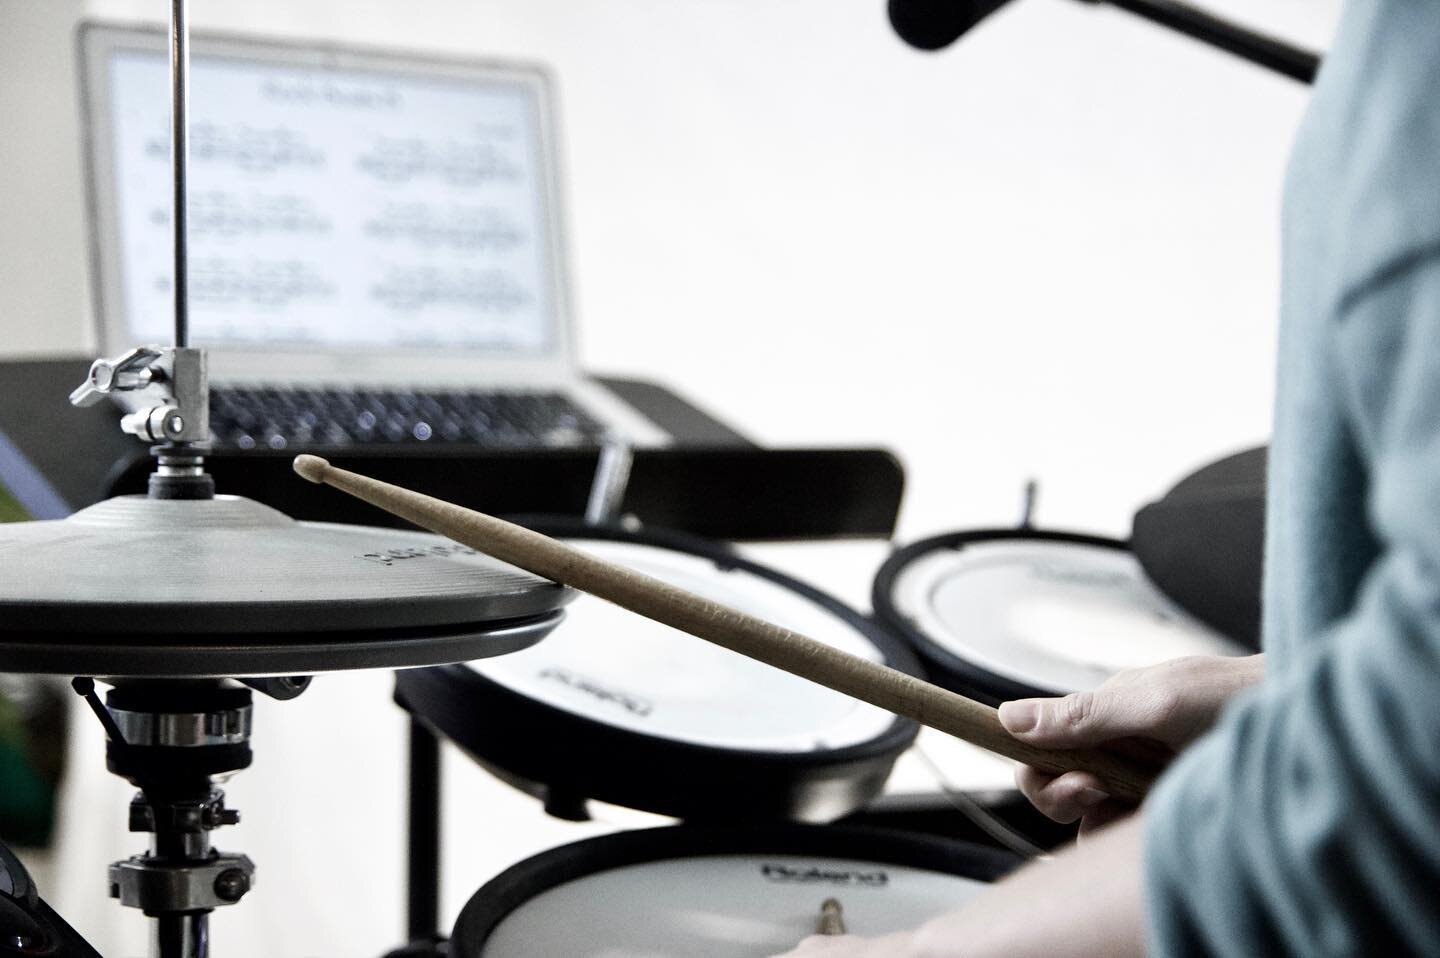 Yes, you can do drum lessons online. Acoustic kit only? Not an issue. Chat with us - we&rsquo;d love to get you set up and learning.